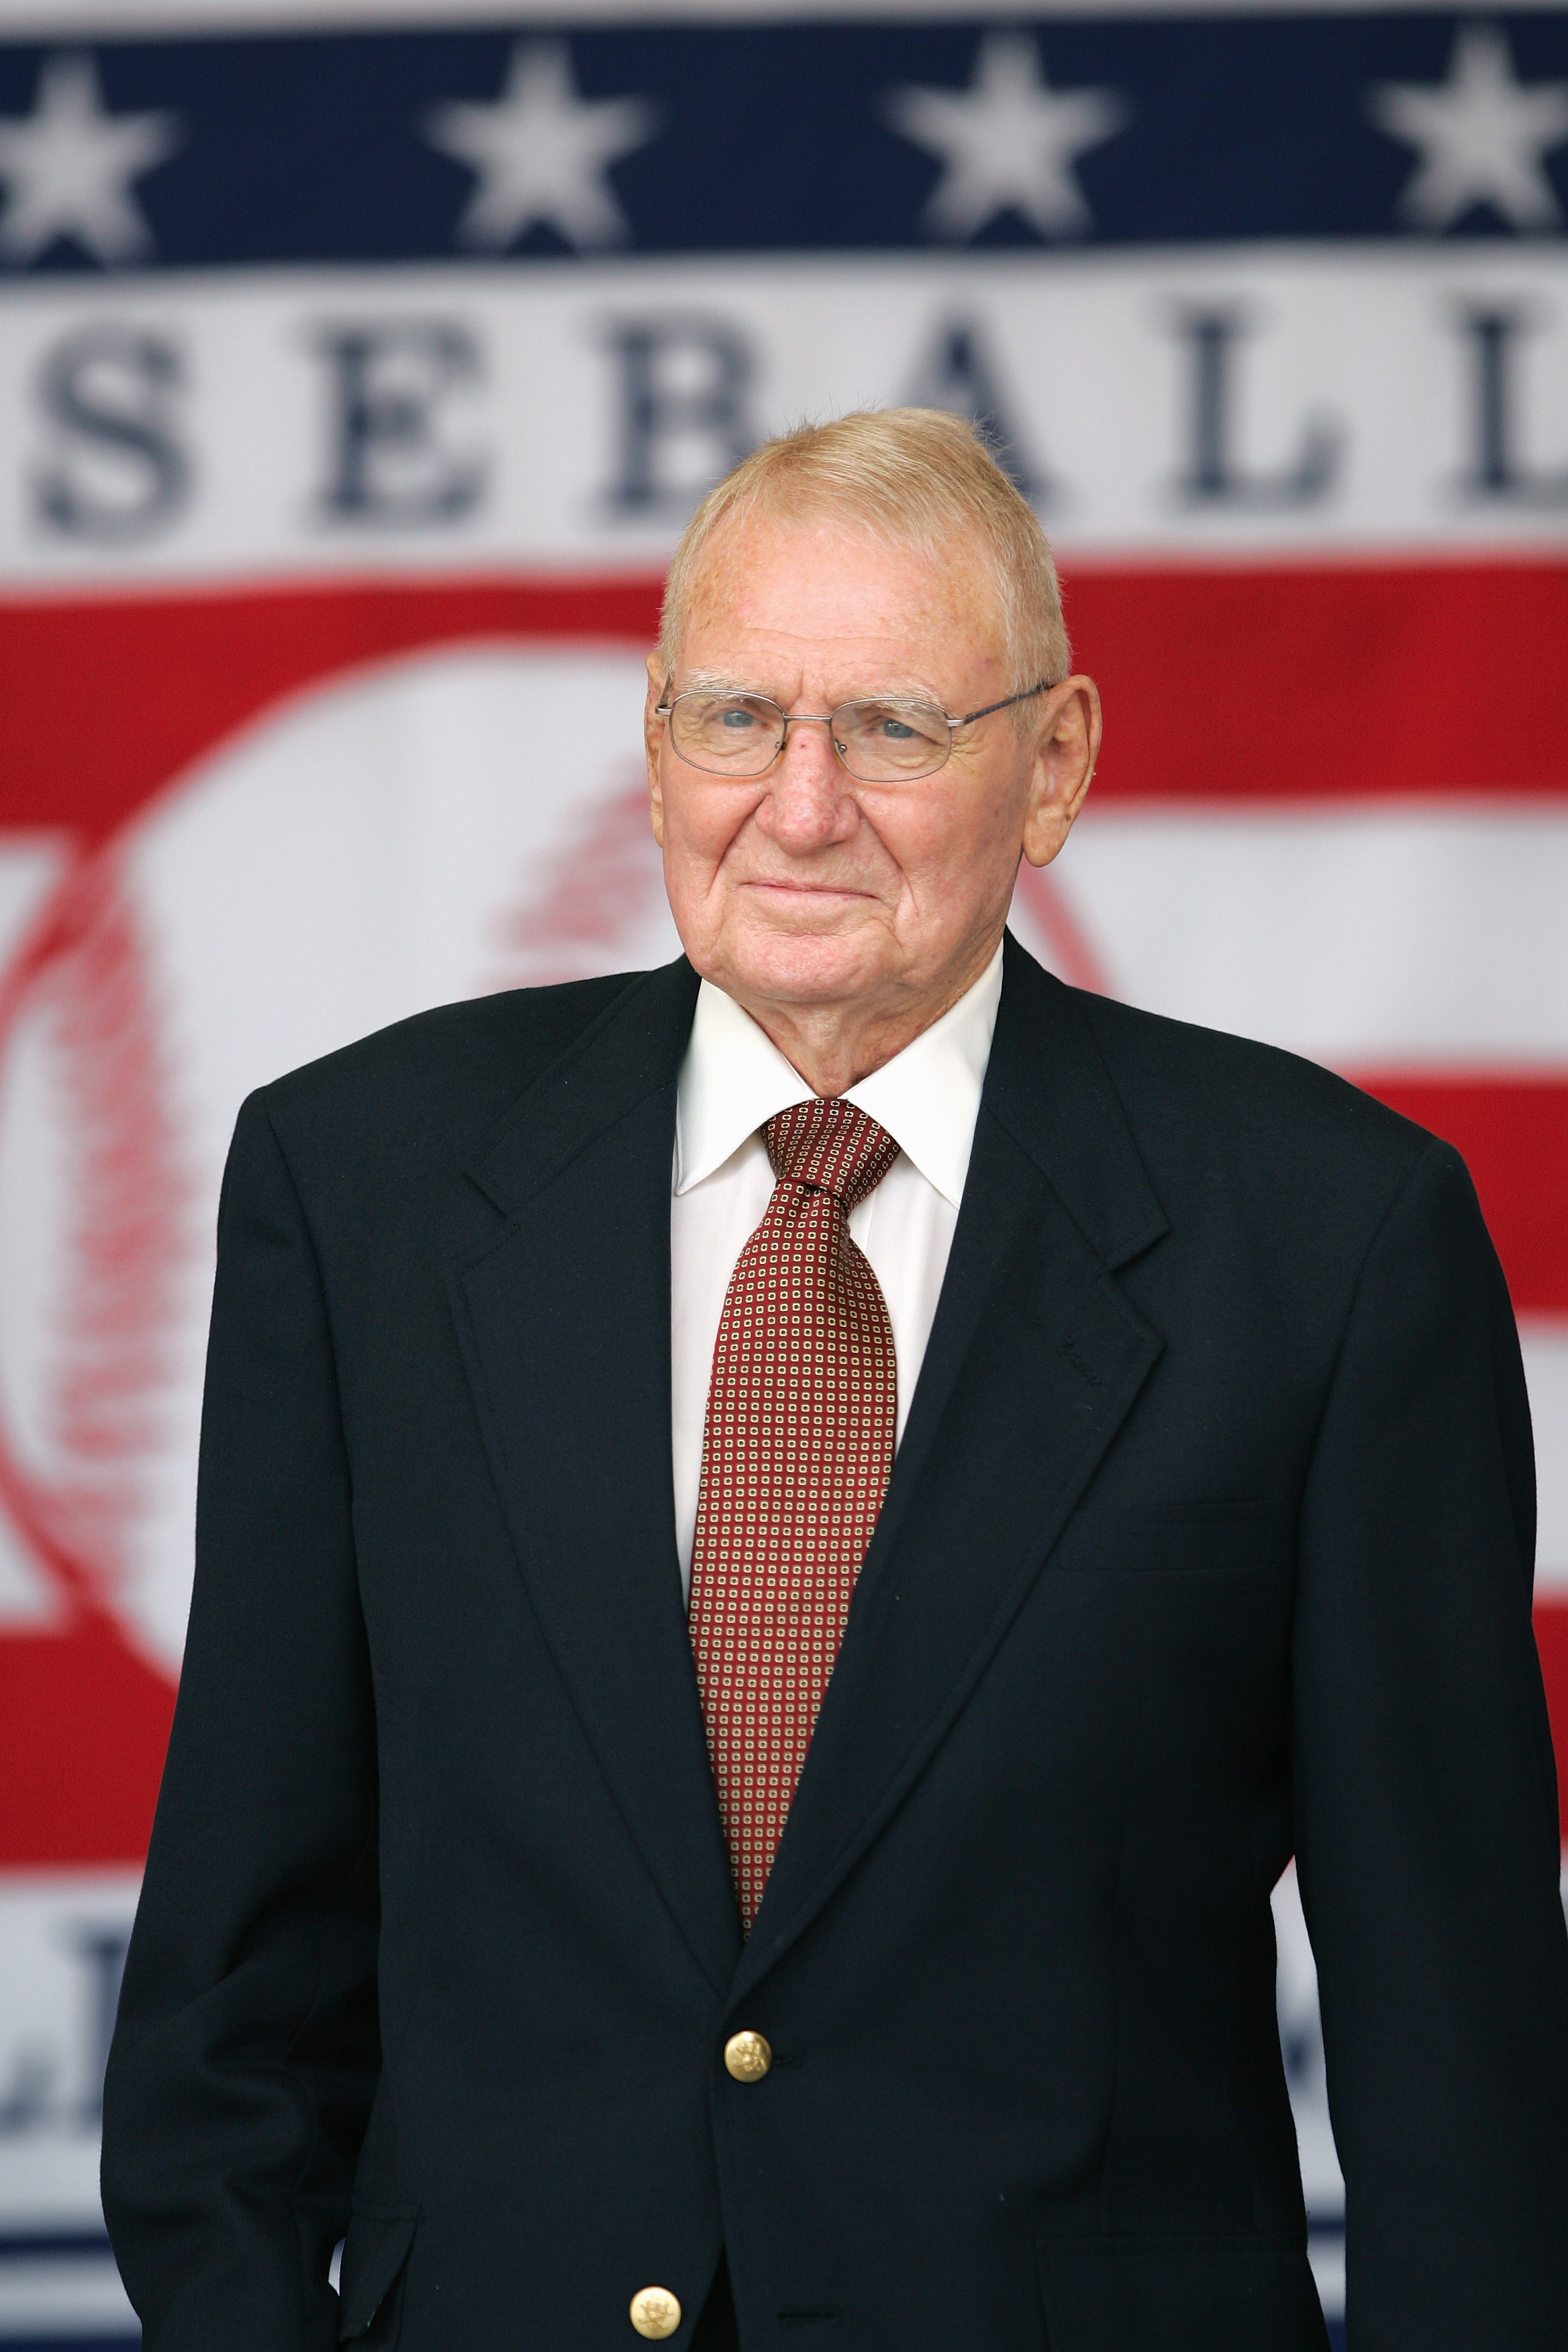 COOPERSTOWN, NY - JULY 31: Hall of Famer George Kell attends the Baseball Hall of Fame Induction ceremony on July 31, 2005 at the Clark Sports Complex in Cooperstown, New York.  (Photo by Ezra Shaw/Getty Images)